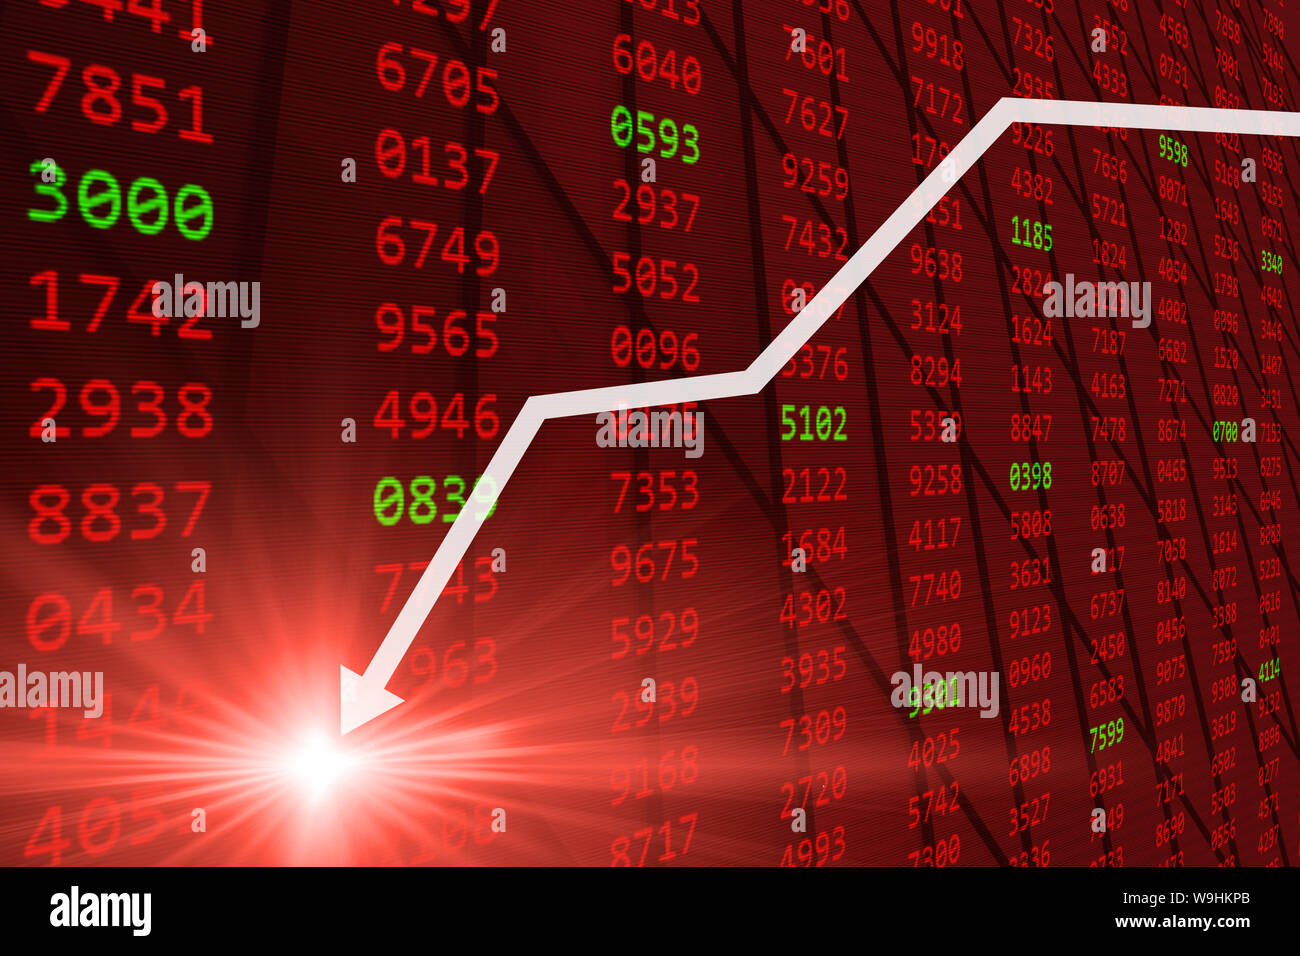 Stock Market - Falling stock prices drop down from Global economic and financial  crisis Stock Photo